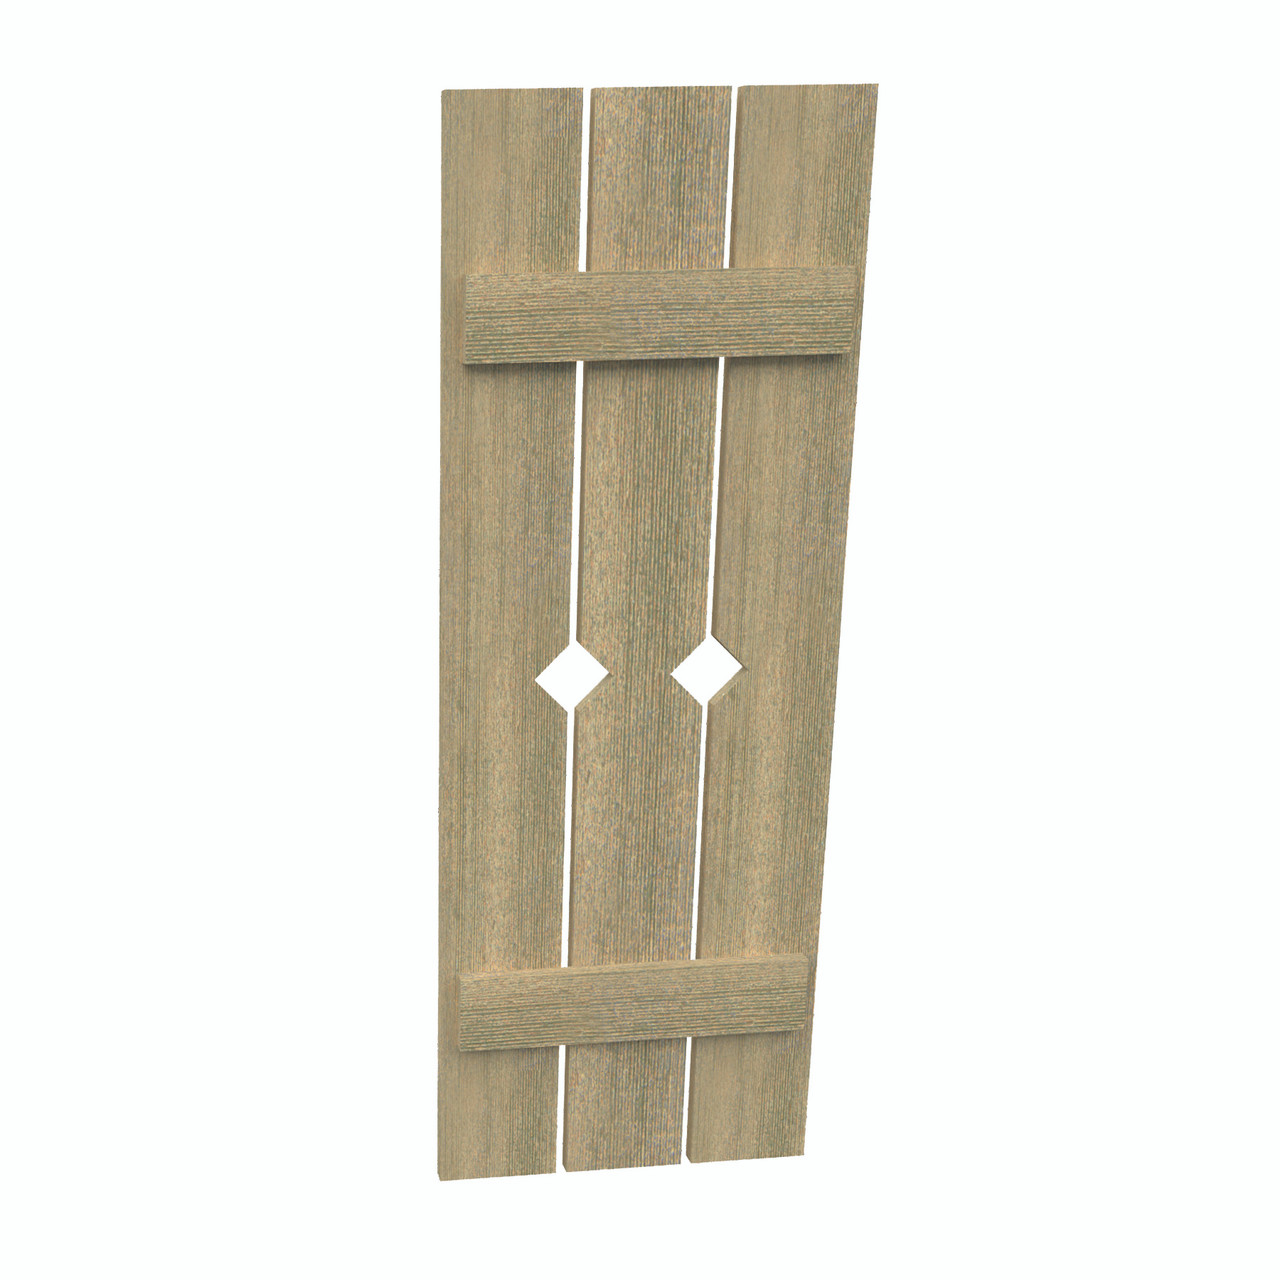 18 inch by 46 inch Plank Shutter with 3-Plank, Diamond